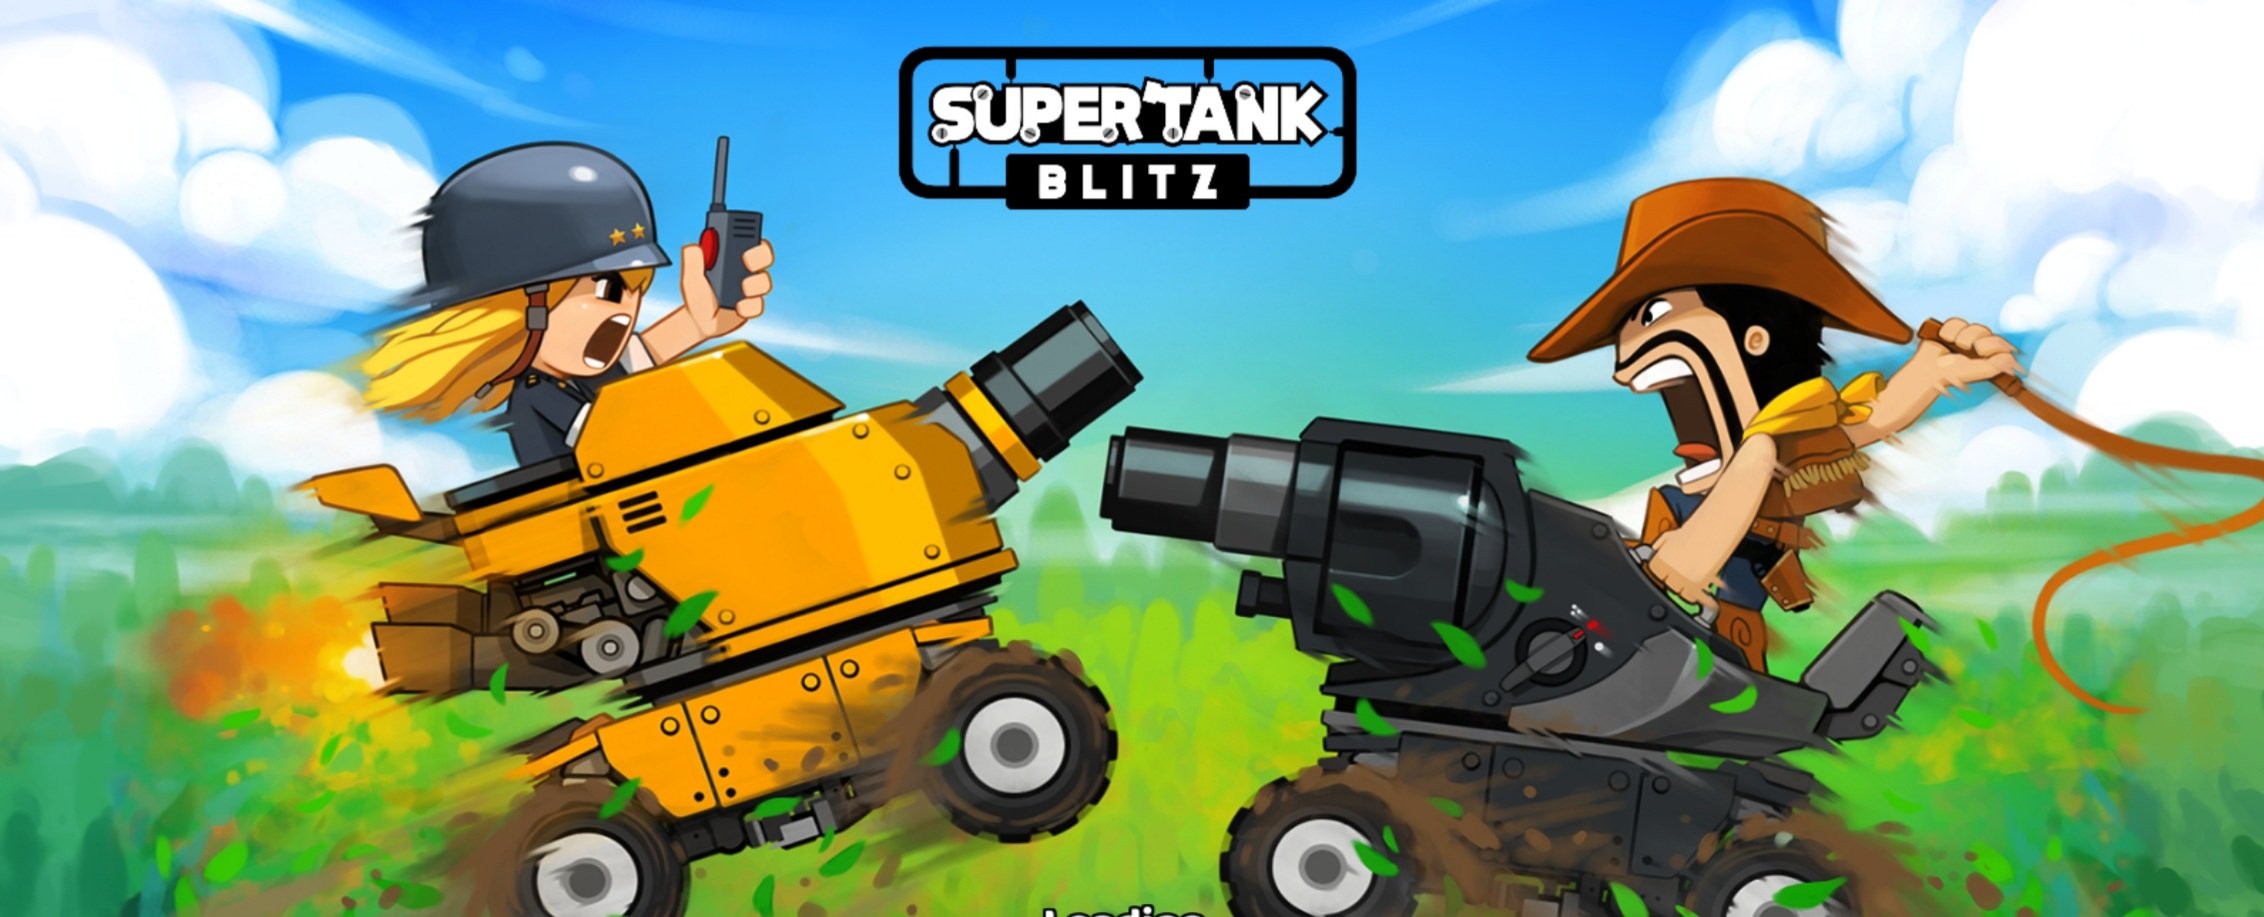 Super Tank Blitz Review – Have Fun Building and Blowing Tanks Up